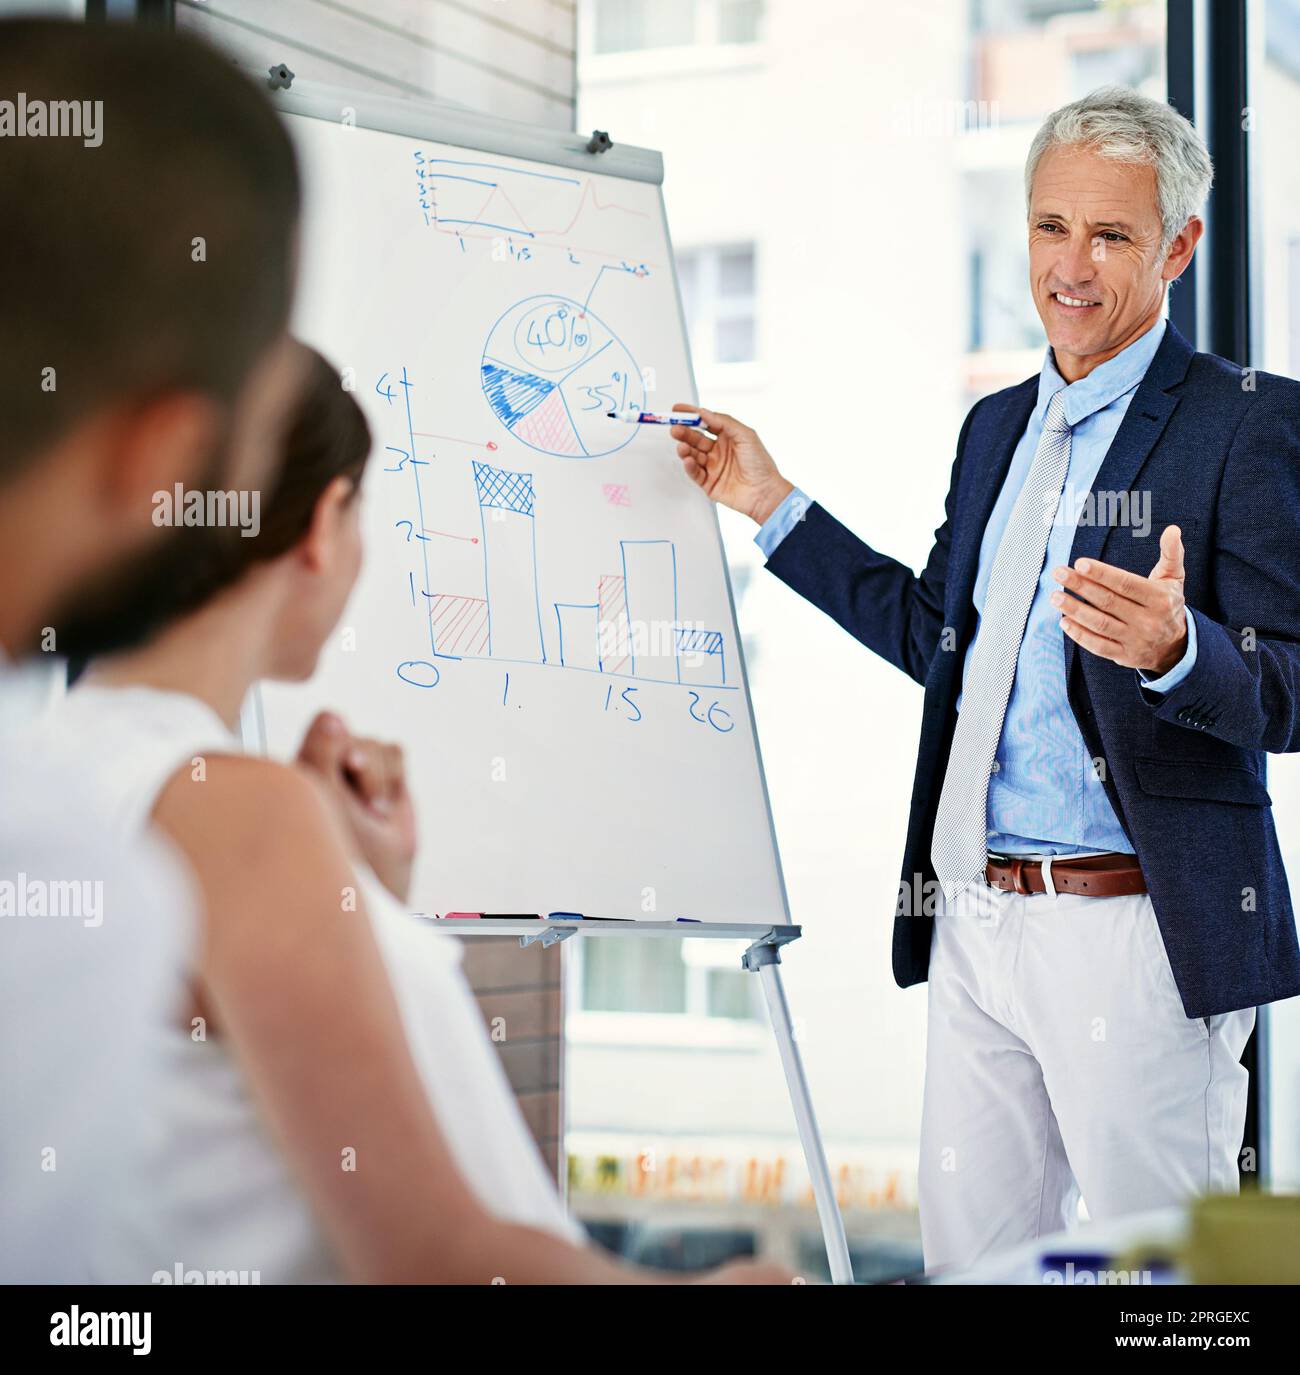 Lets incorporate your great ideas into the project. a businessman giving a presentation to colleagues in an office. Stock Photo